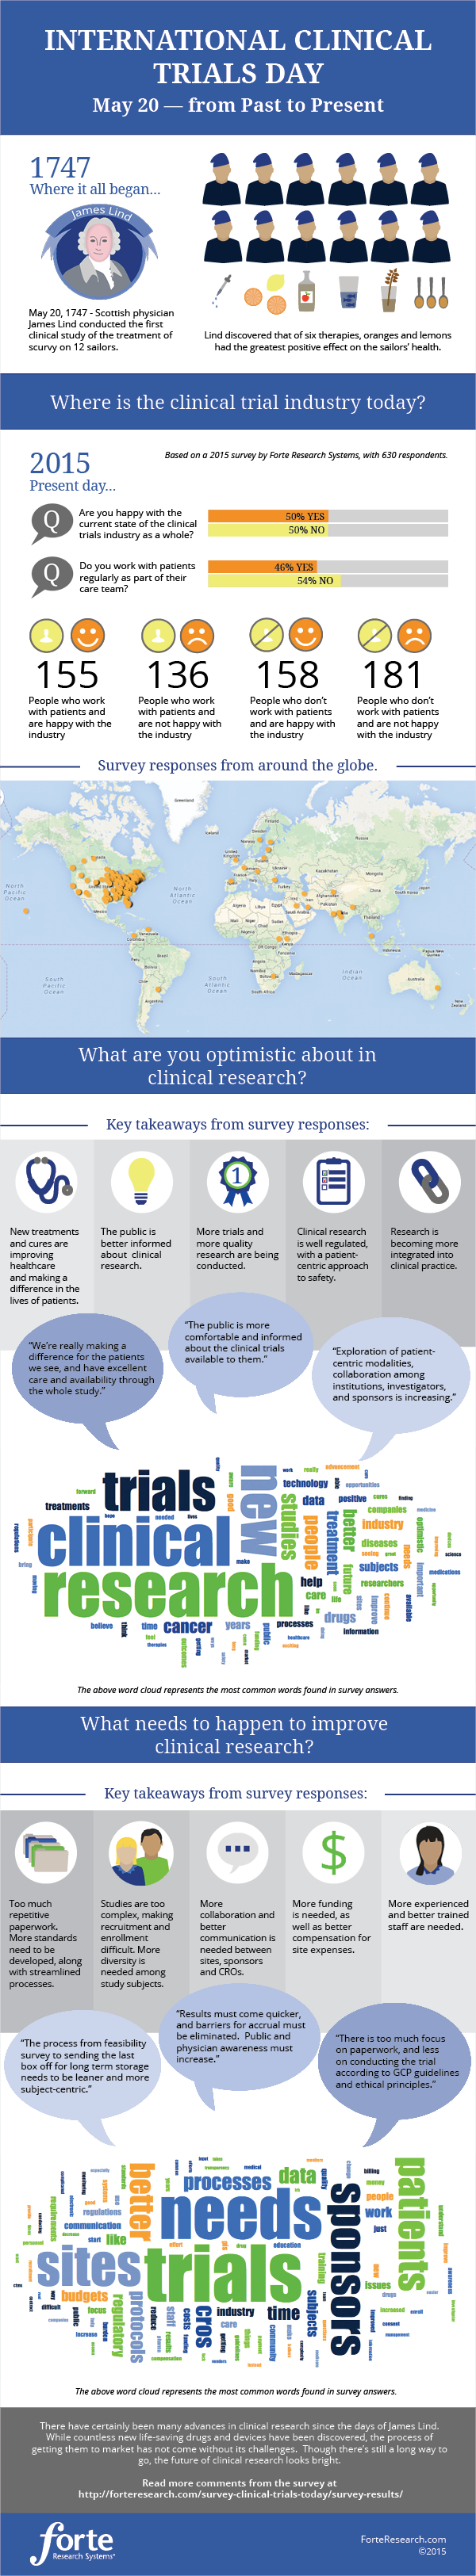 International Clinical Trials Day Infographic